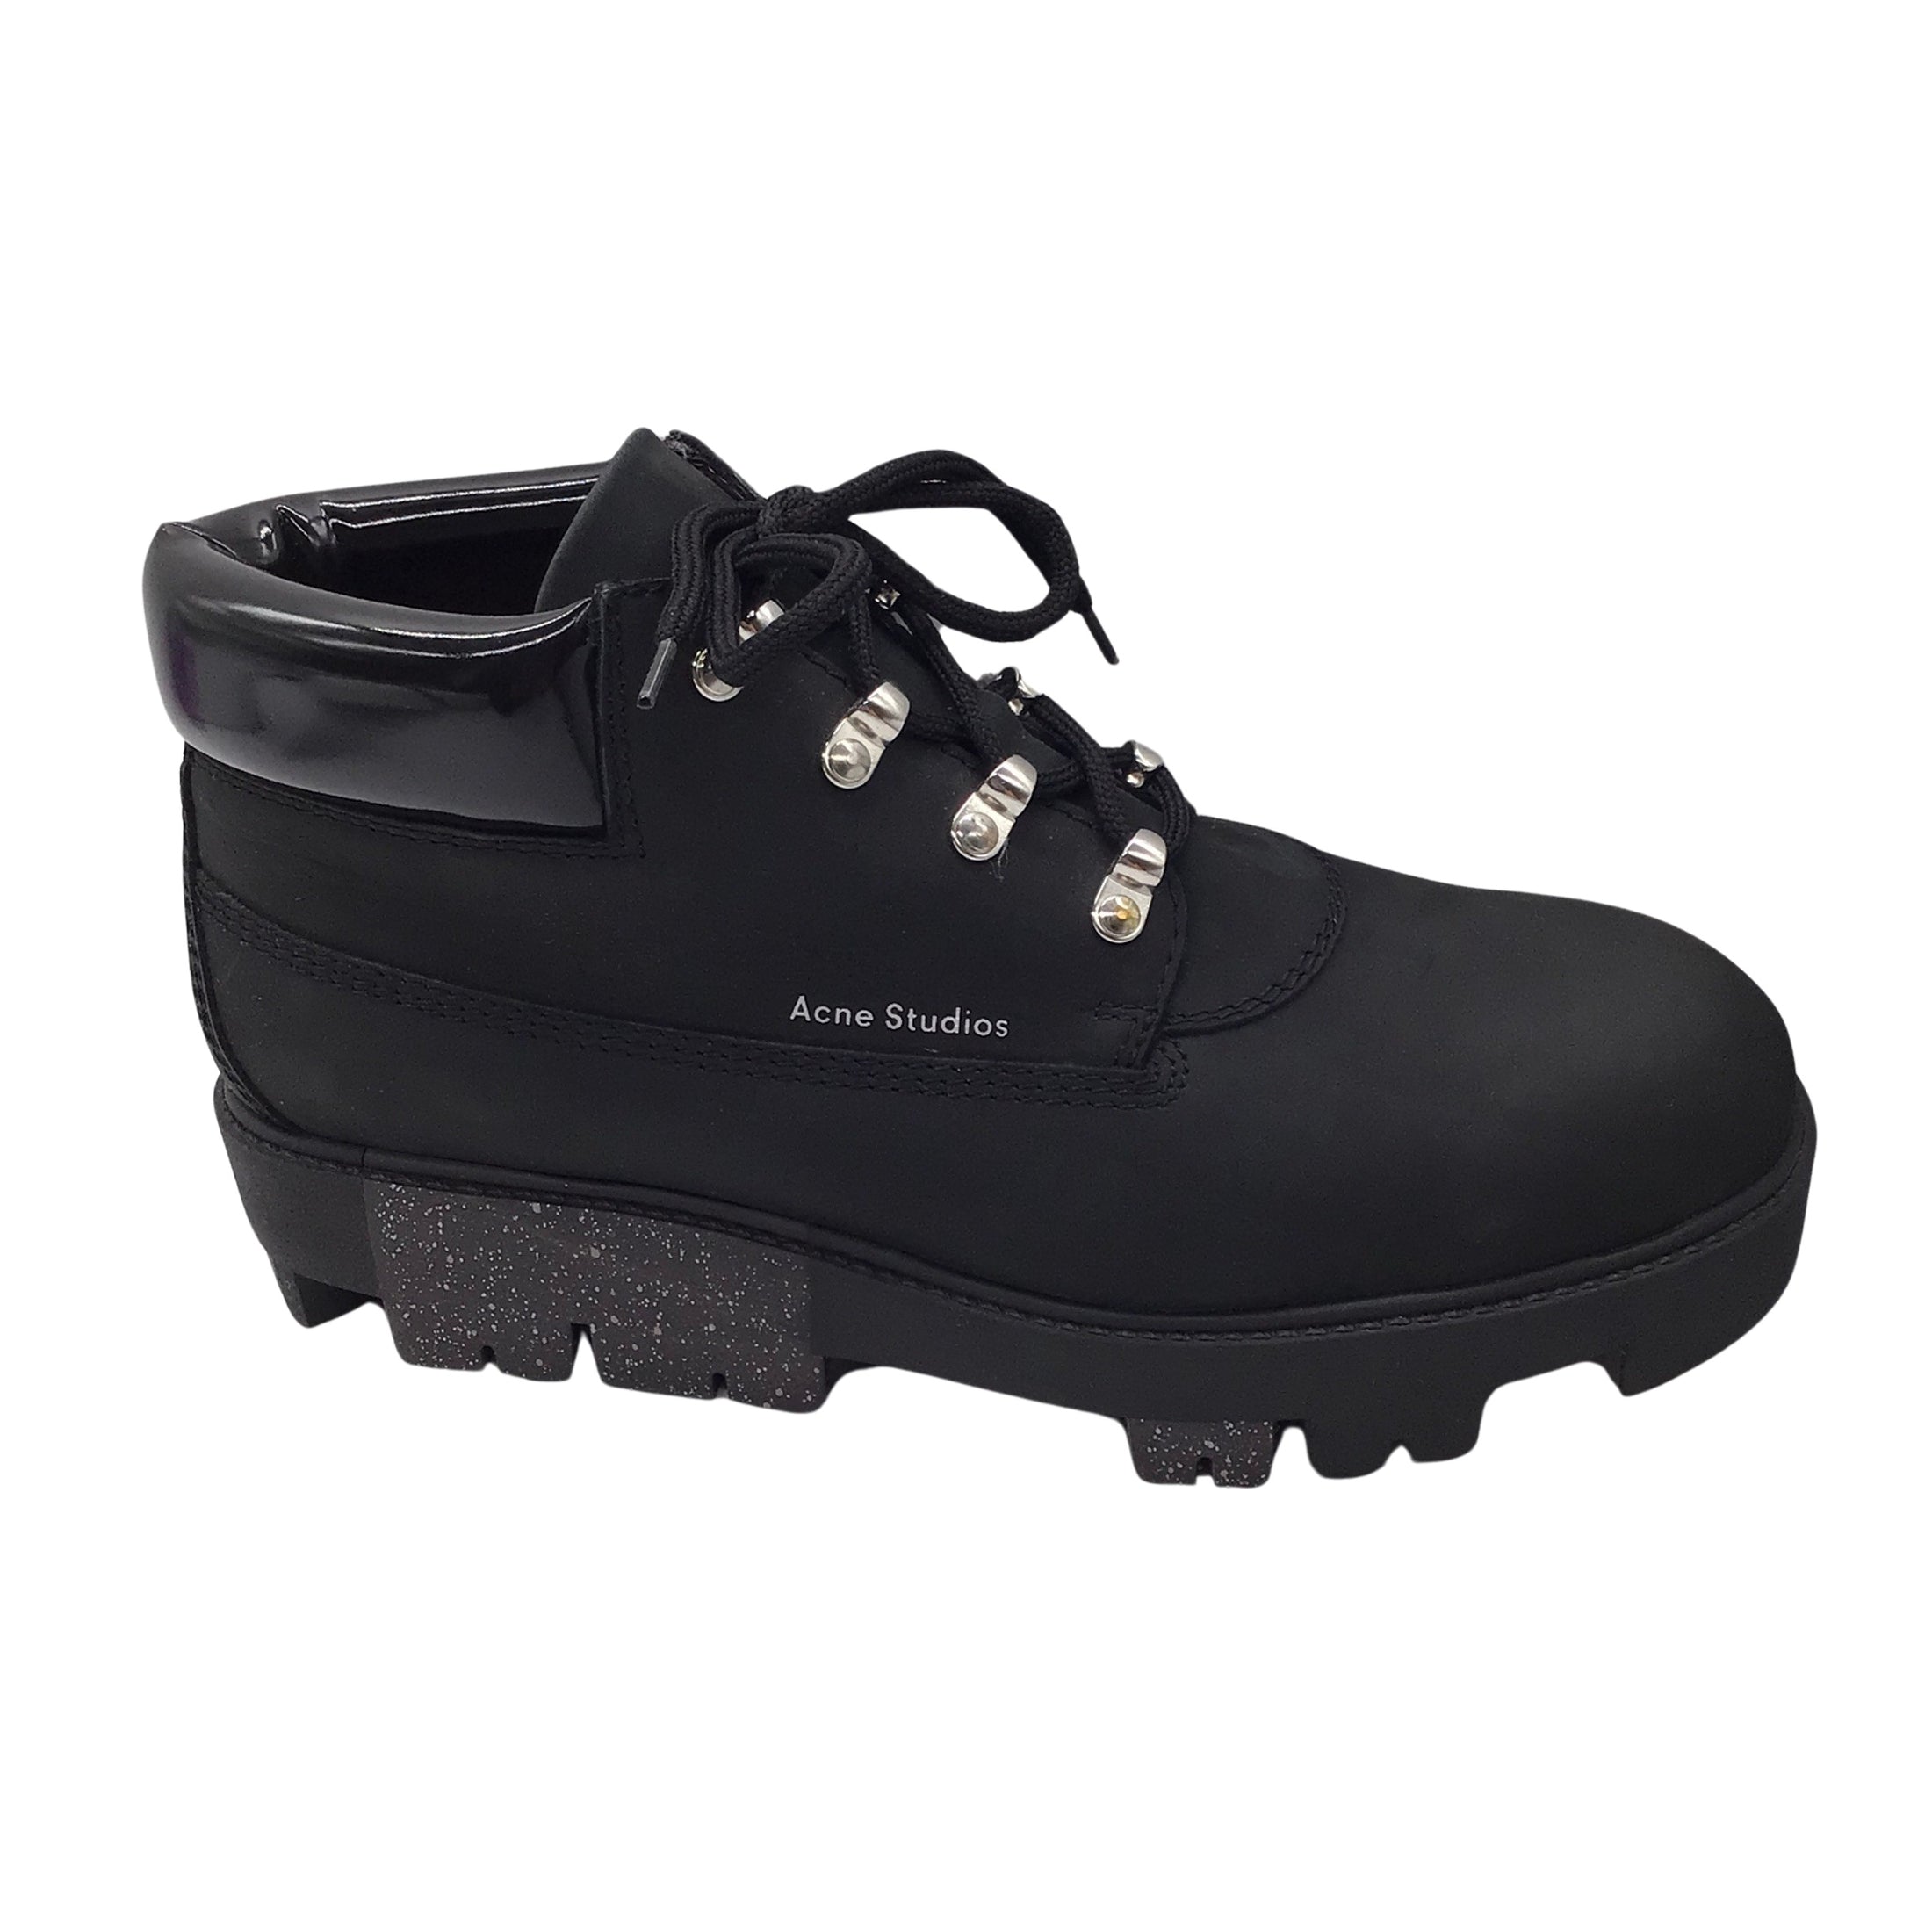 Acne Studios Telde Black Lace-Up Leather Hiking Boots